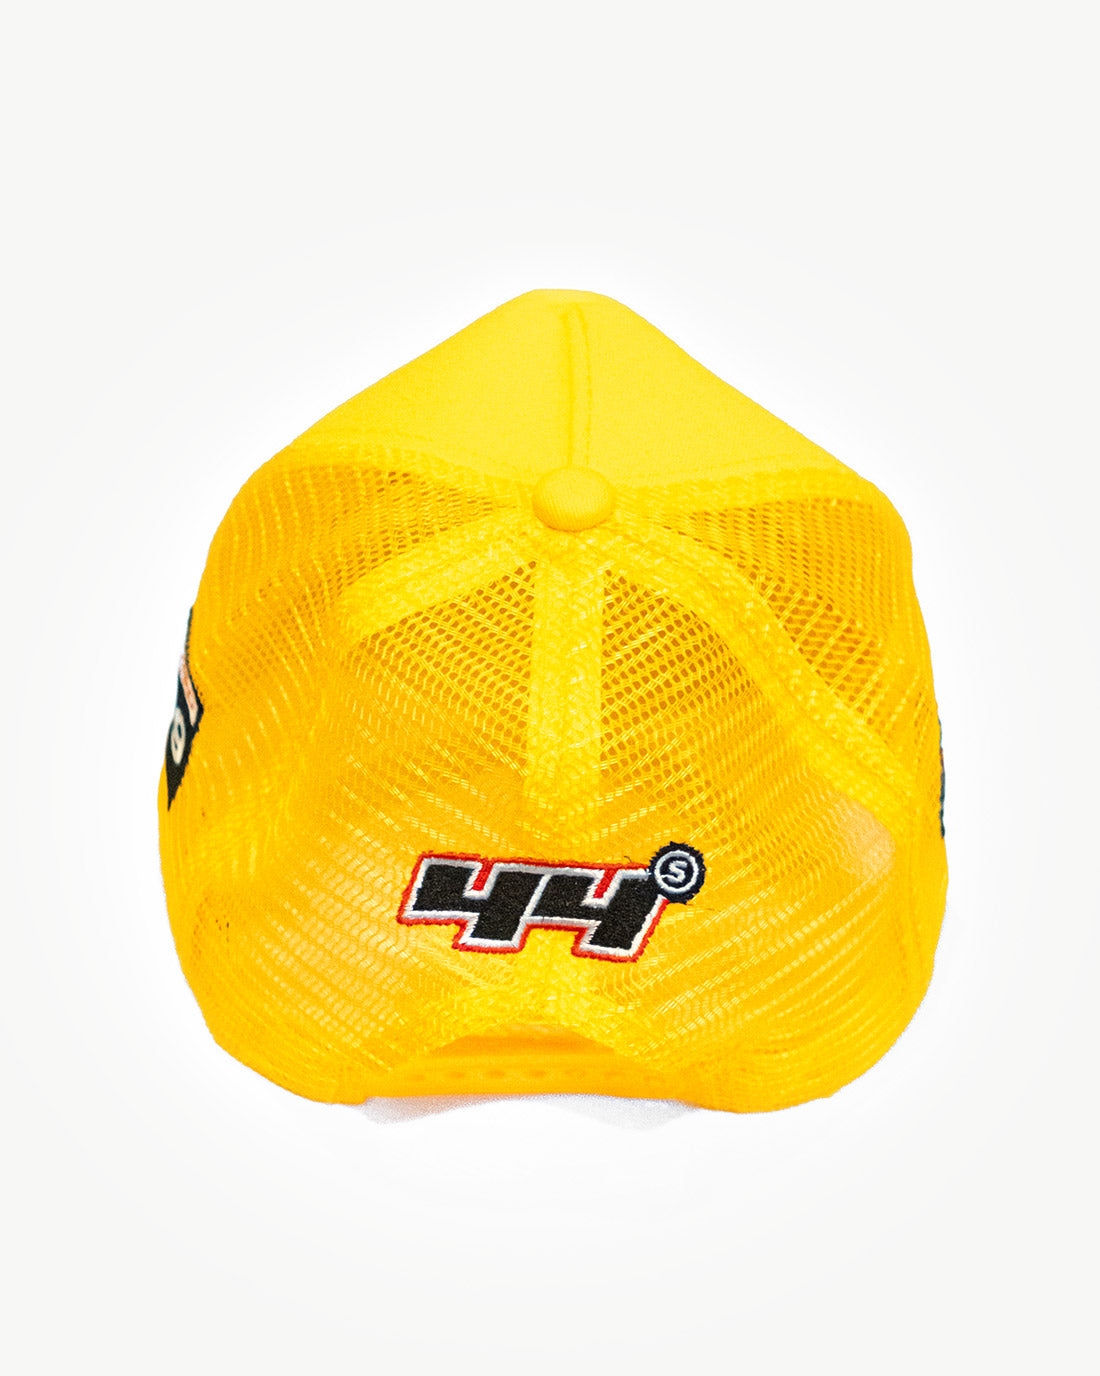 Back side of a super yellow mesh snapback hat with cool patches.